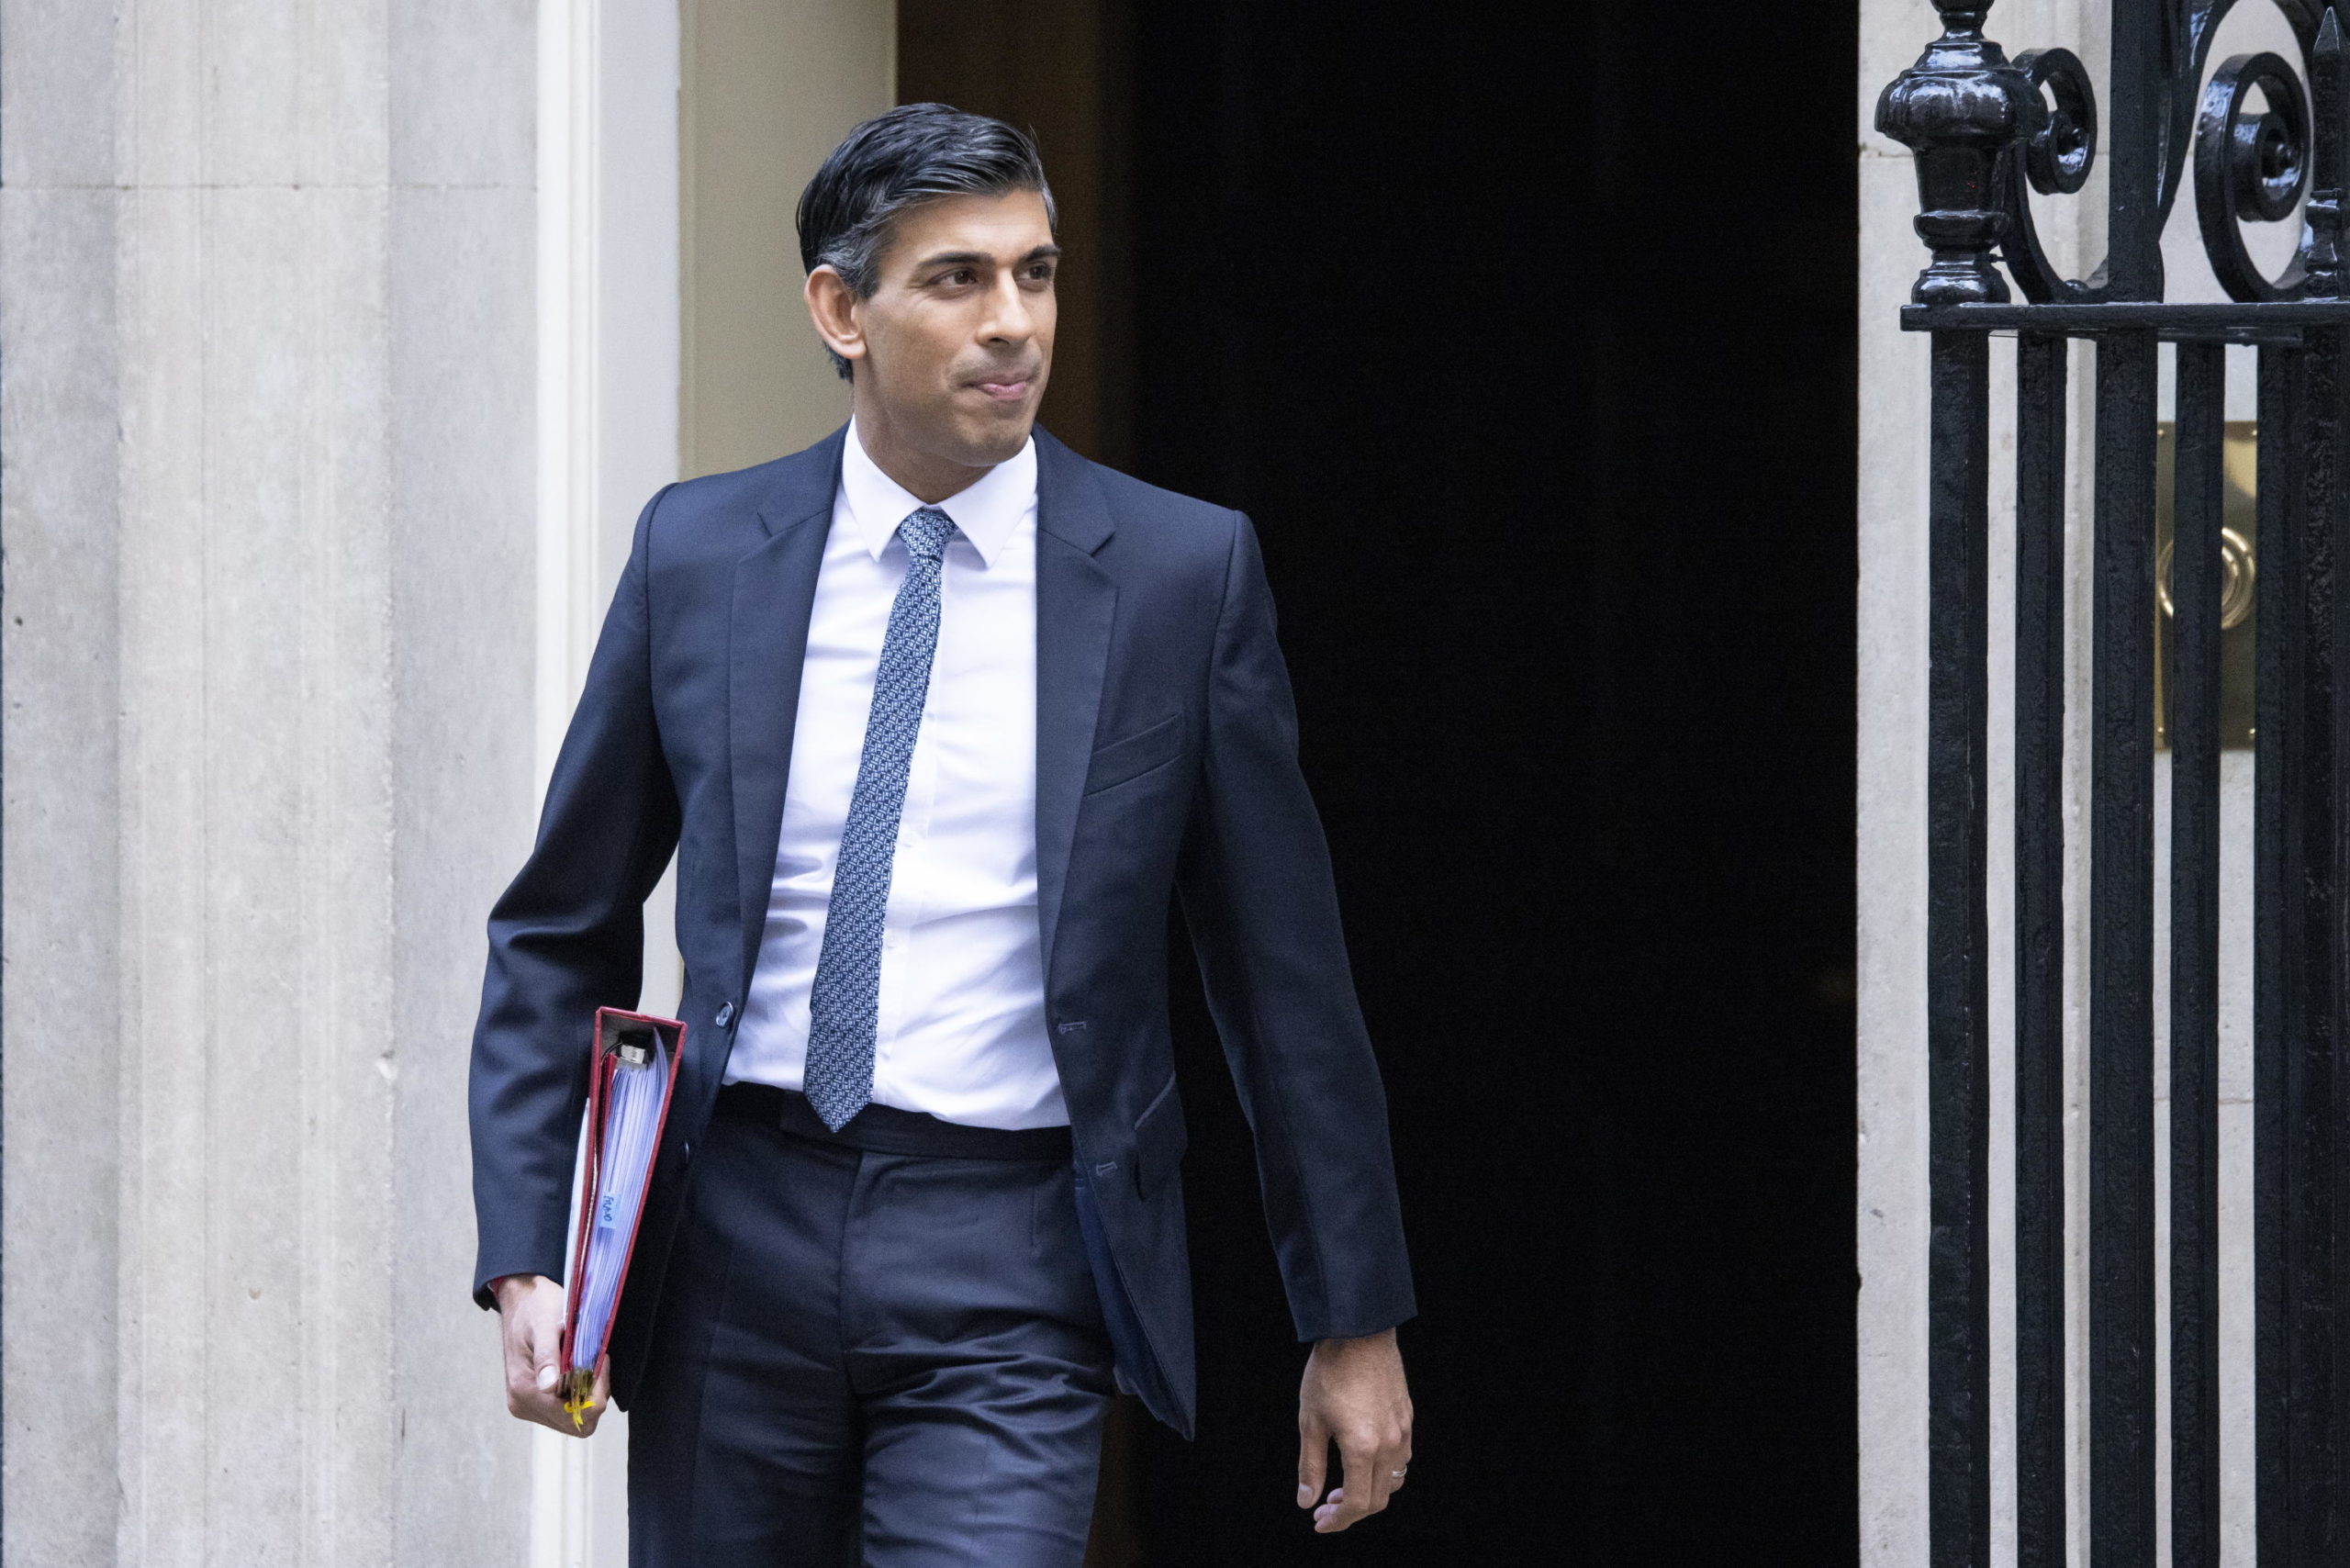 epa10338490 British Prime Minister Rishi Sunak departs his official residence at 10 Downing Street to appear at Prime Minister's Questions (PMQs) at the Parliament in London, Britain, 30 November 2022. Sunak is under pressure as Royal Mail workers and university lecturers are on industrial strike and health workers in Britain, including nurses, ambulance staff and emergency call handlers called for a strike action before Christmas as well.  EPA/TOLGA AKMEN